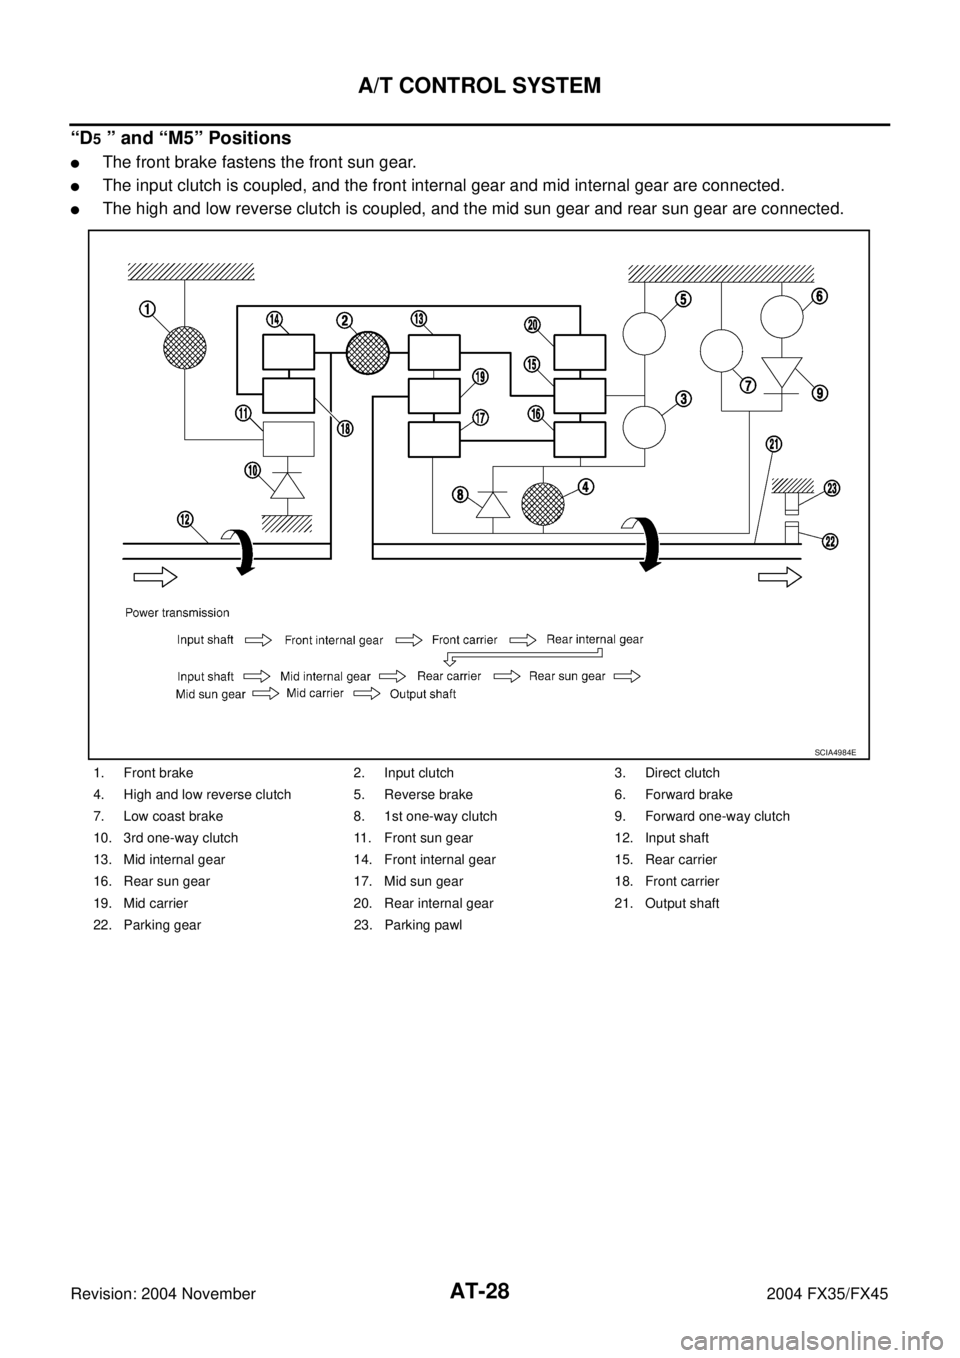 INFINITI FX35 2004  Service Manual AT-28
A/T CONTROL SYSTEM
Revision: 2004 November 2004 FX35/FX45
“D5 ” and “M5” Positions
The front brake fastens the front sun gear.
The input clutch is coupled, and the front internal gear 